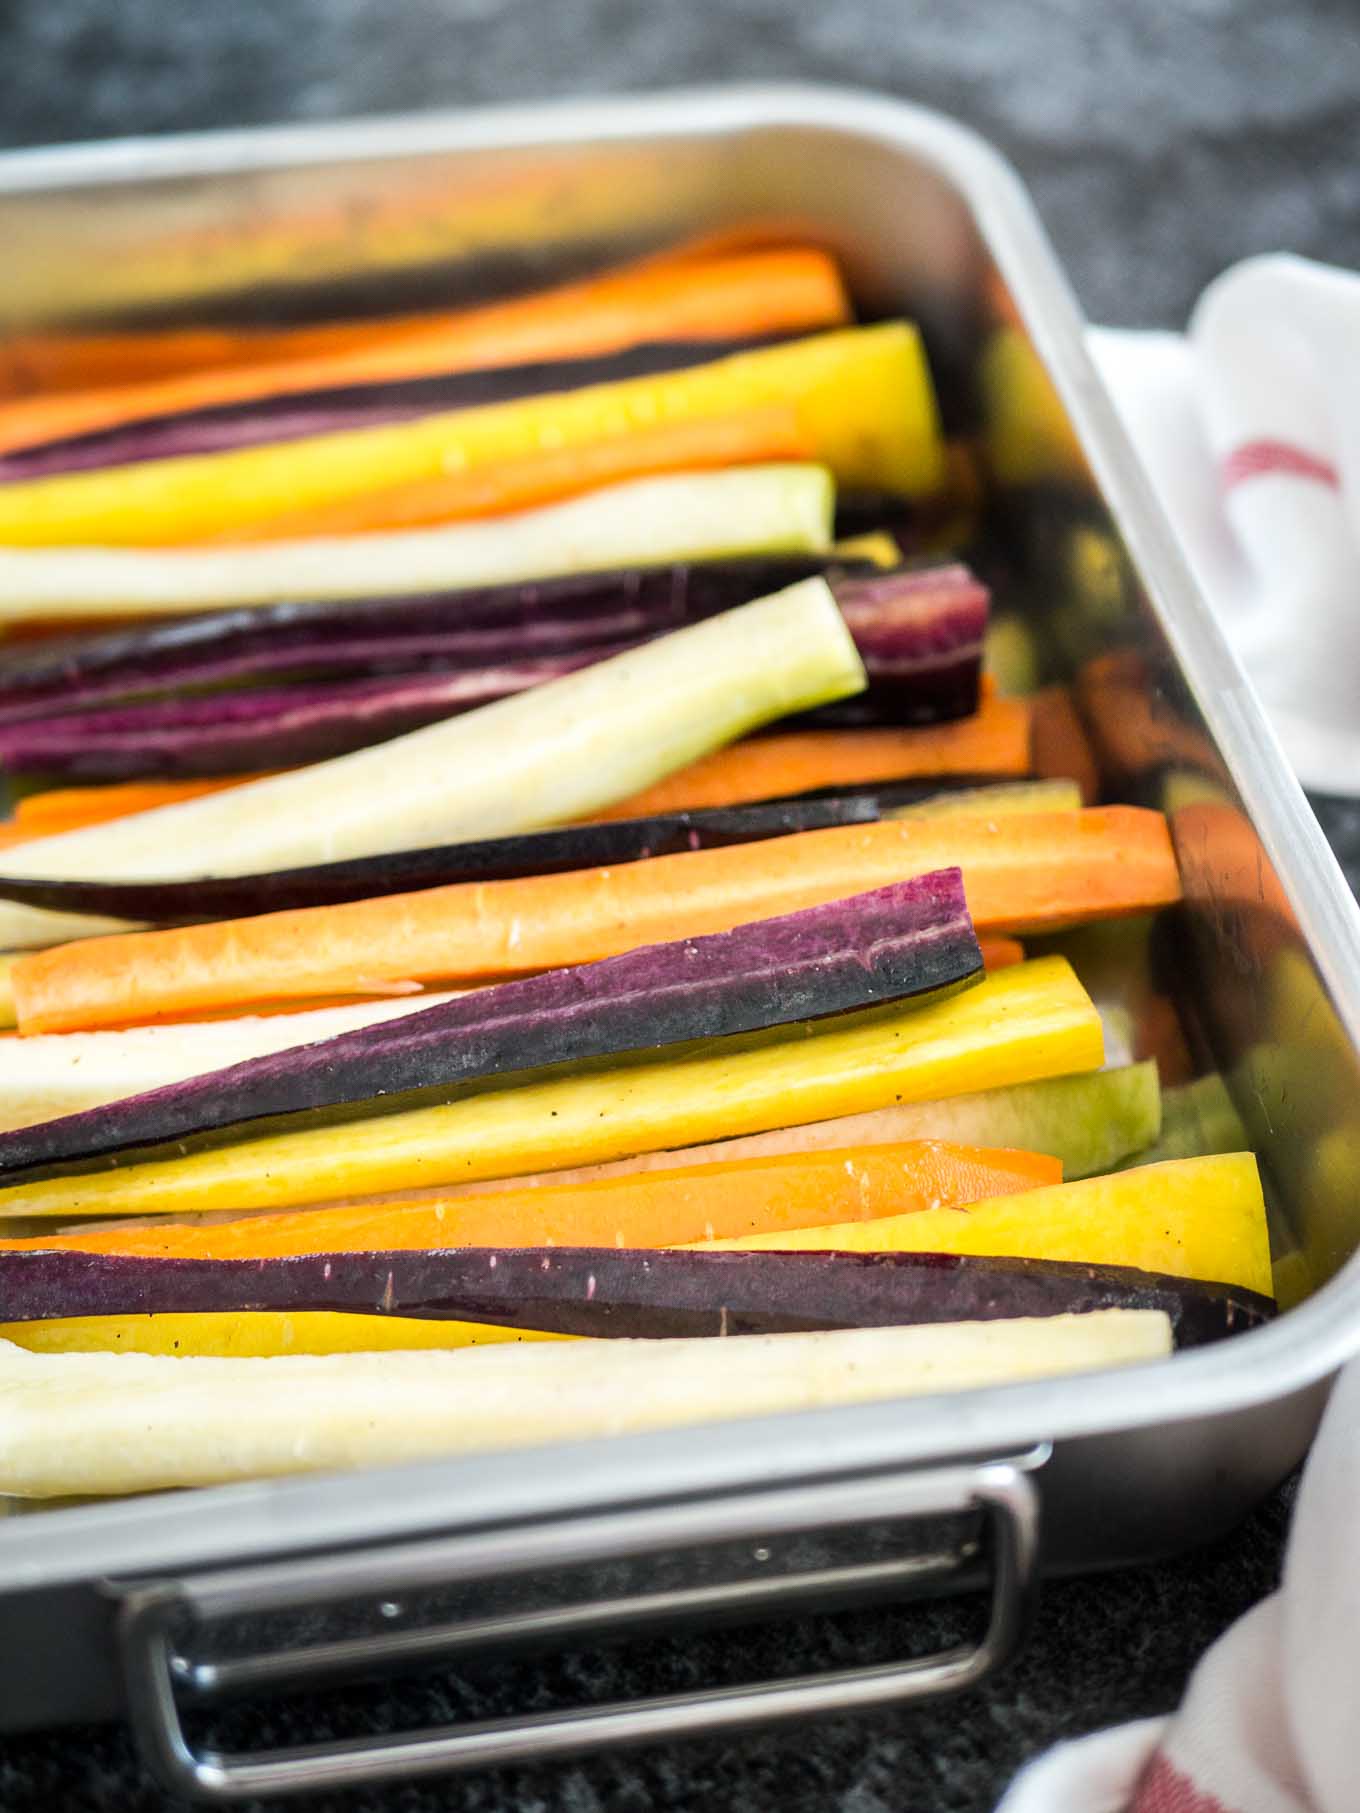 A roasting pan with rainbow carrots cut into wedges lengthwise before baking. There is a white dishtowel with a red stripe next to it.